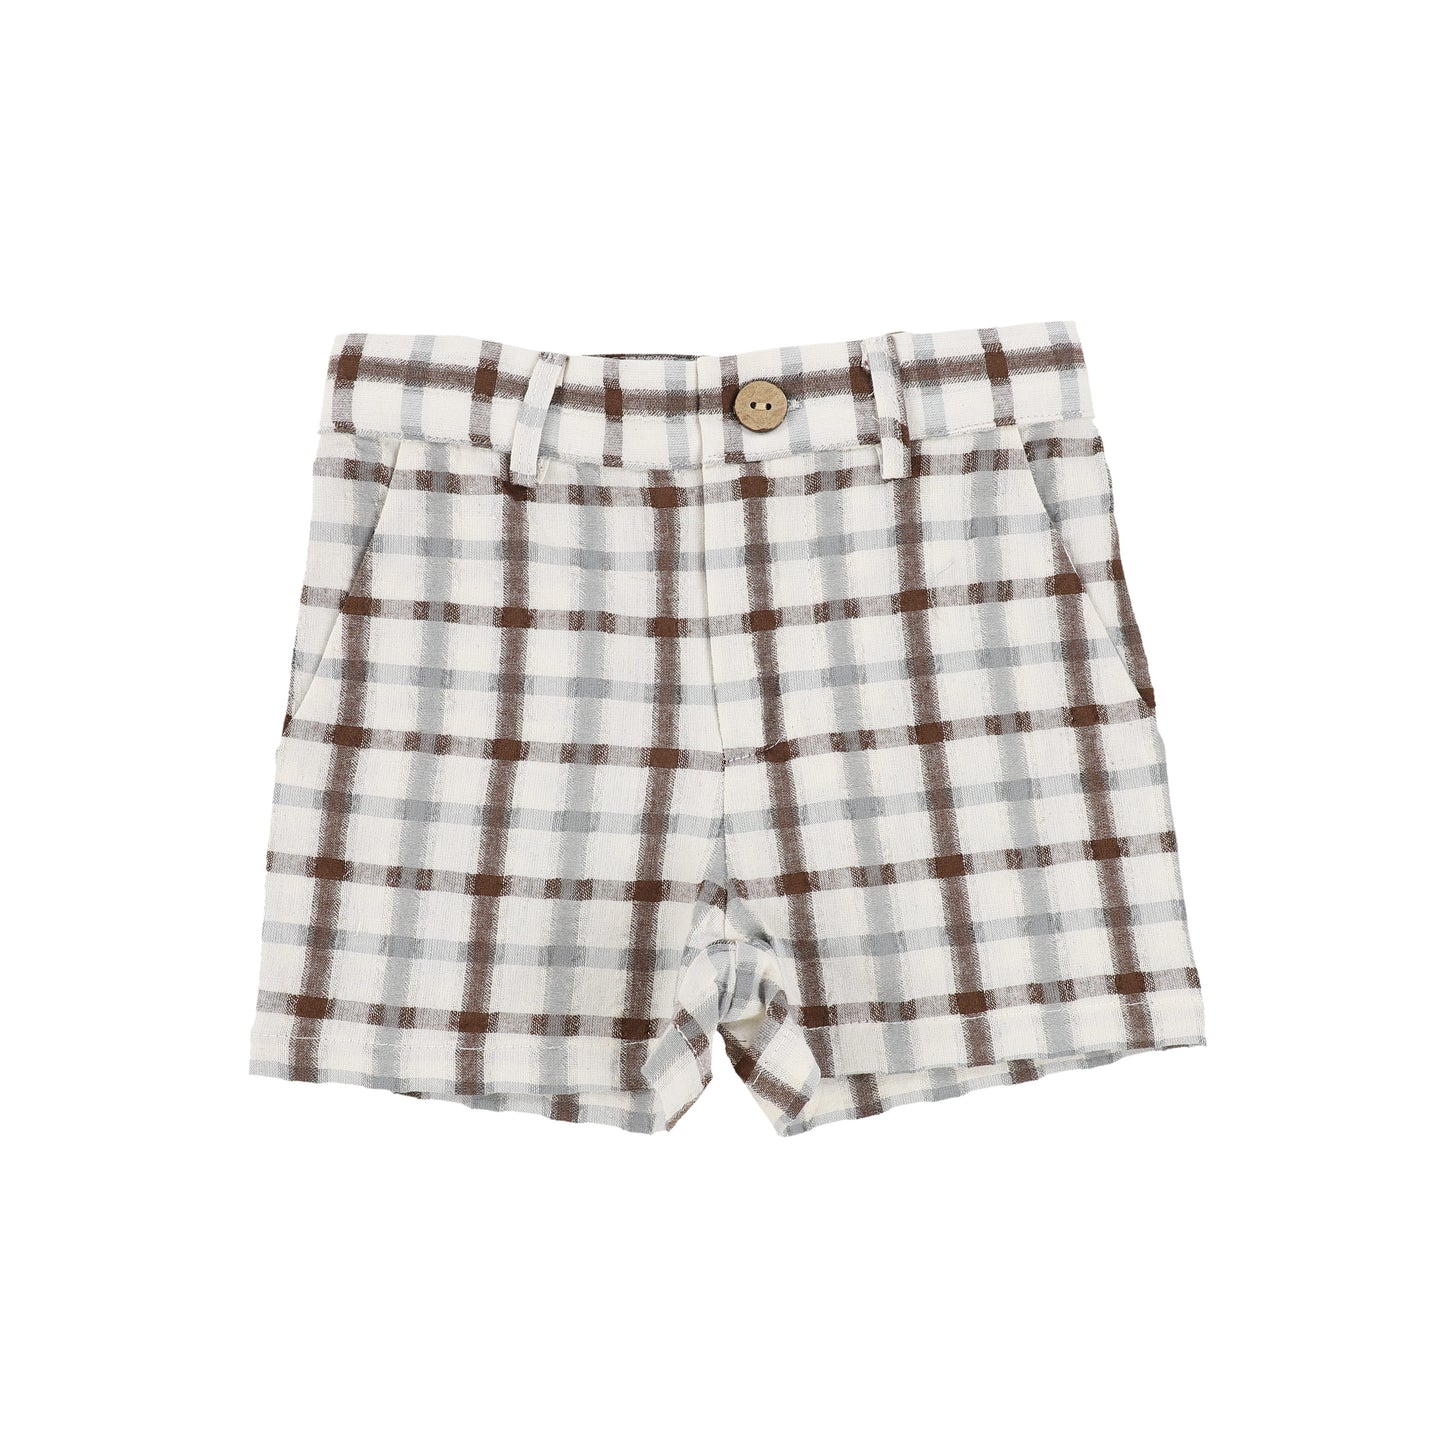 HARPER JAMES BROWN AND GREY PLAID SHORTS [Final Sale]